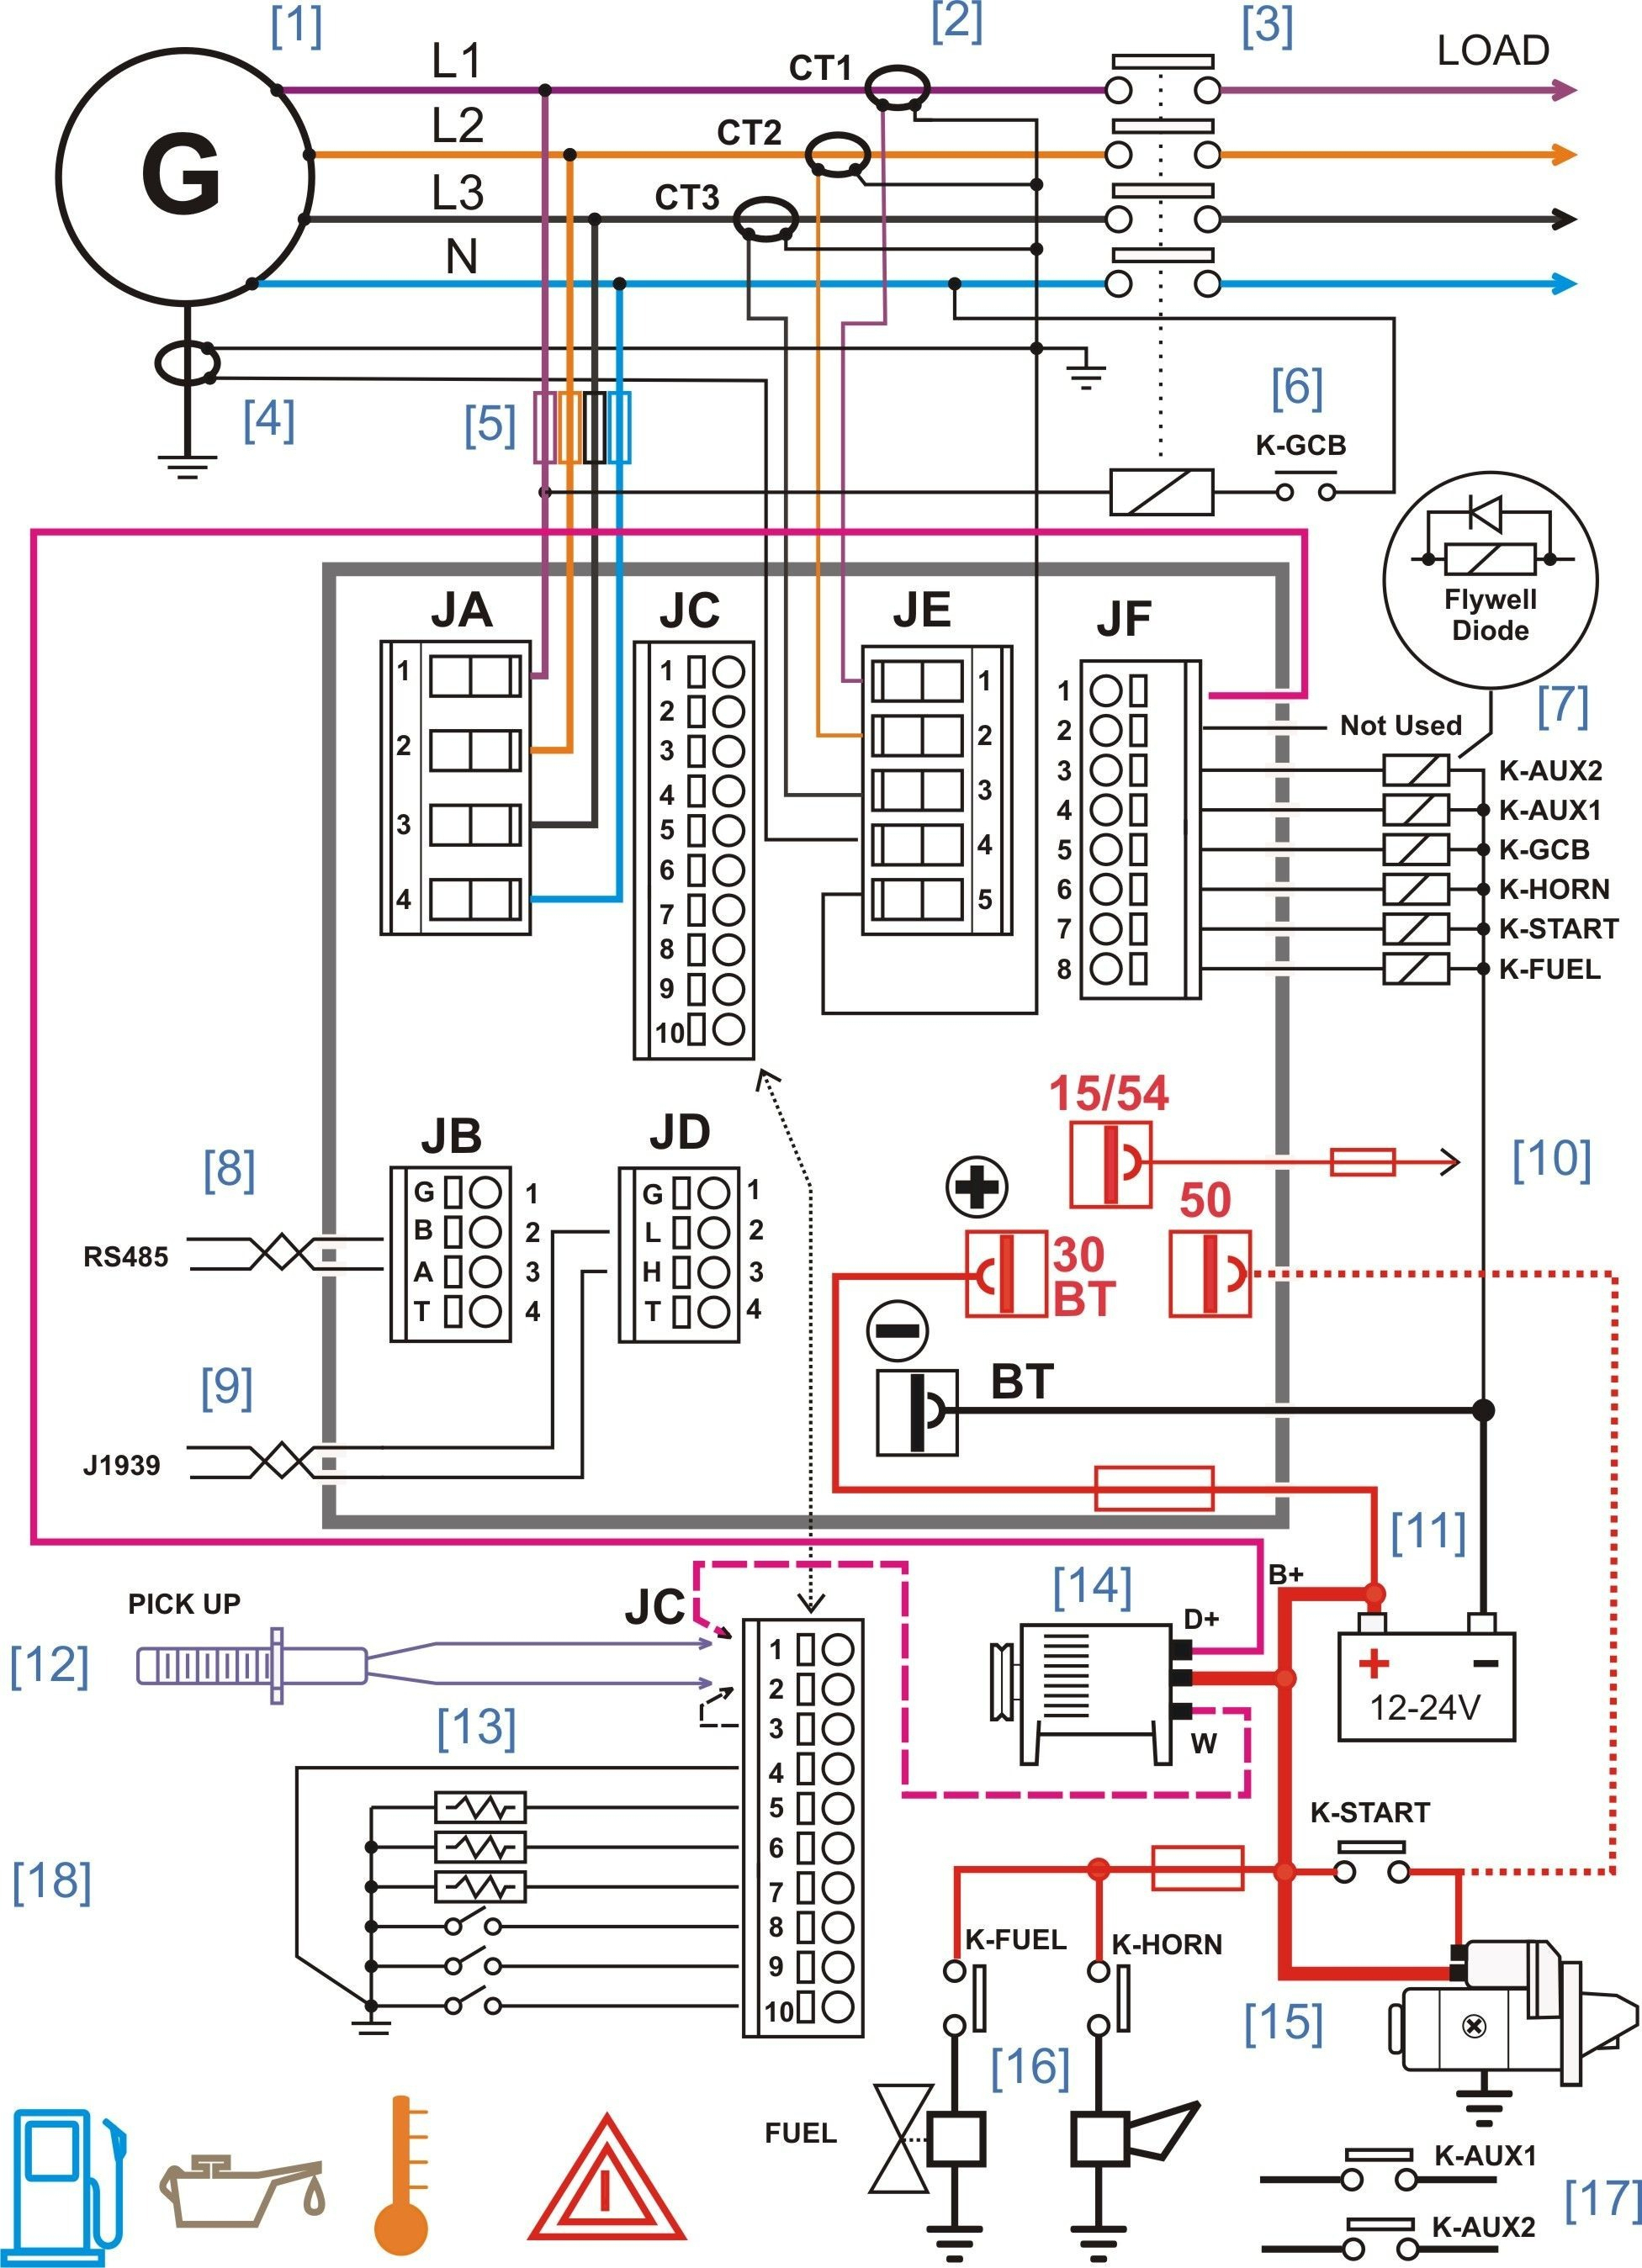 Gallery Of Electrical Wiring Diagram Software Open Source Sample - Wiring Diagram Software Open Source